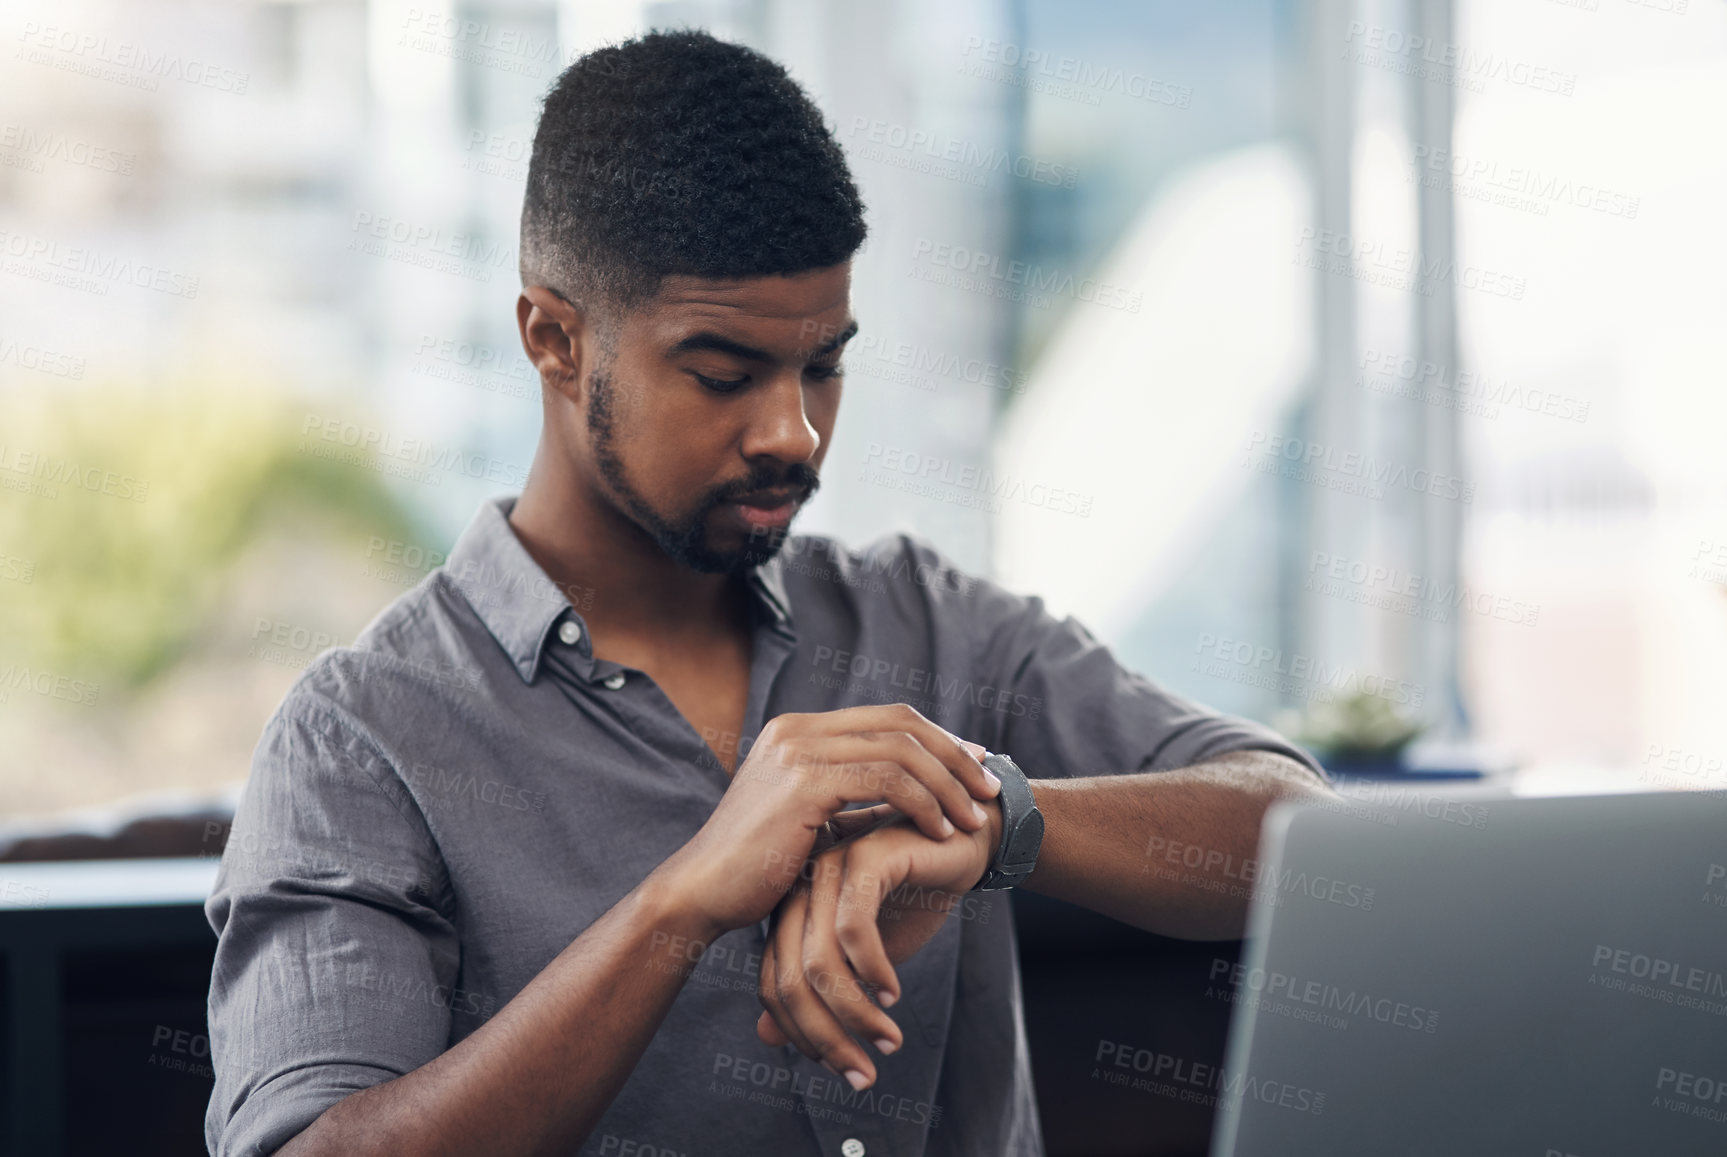 Buy stock photo Shot of a young businessman checking the time while working on a laptop in an office